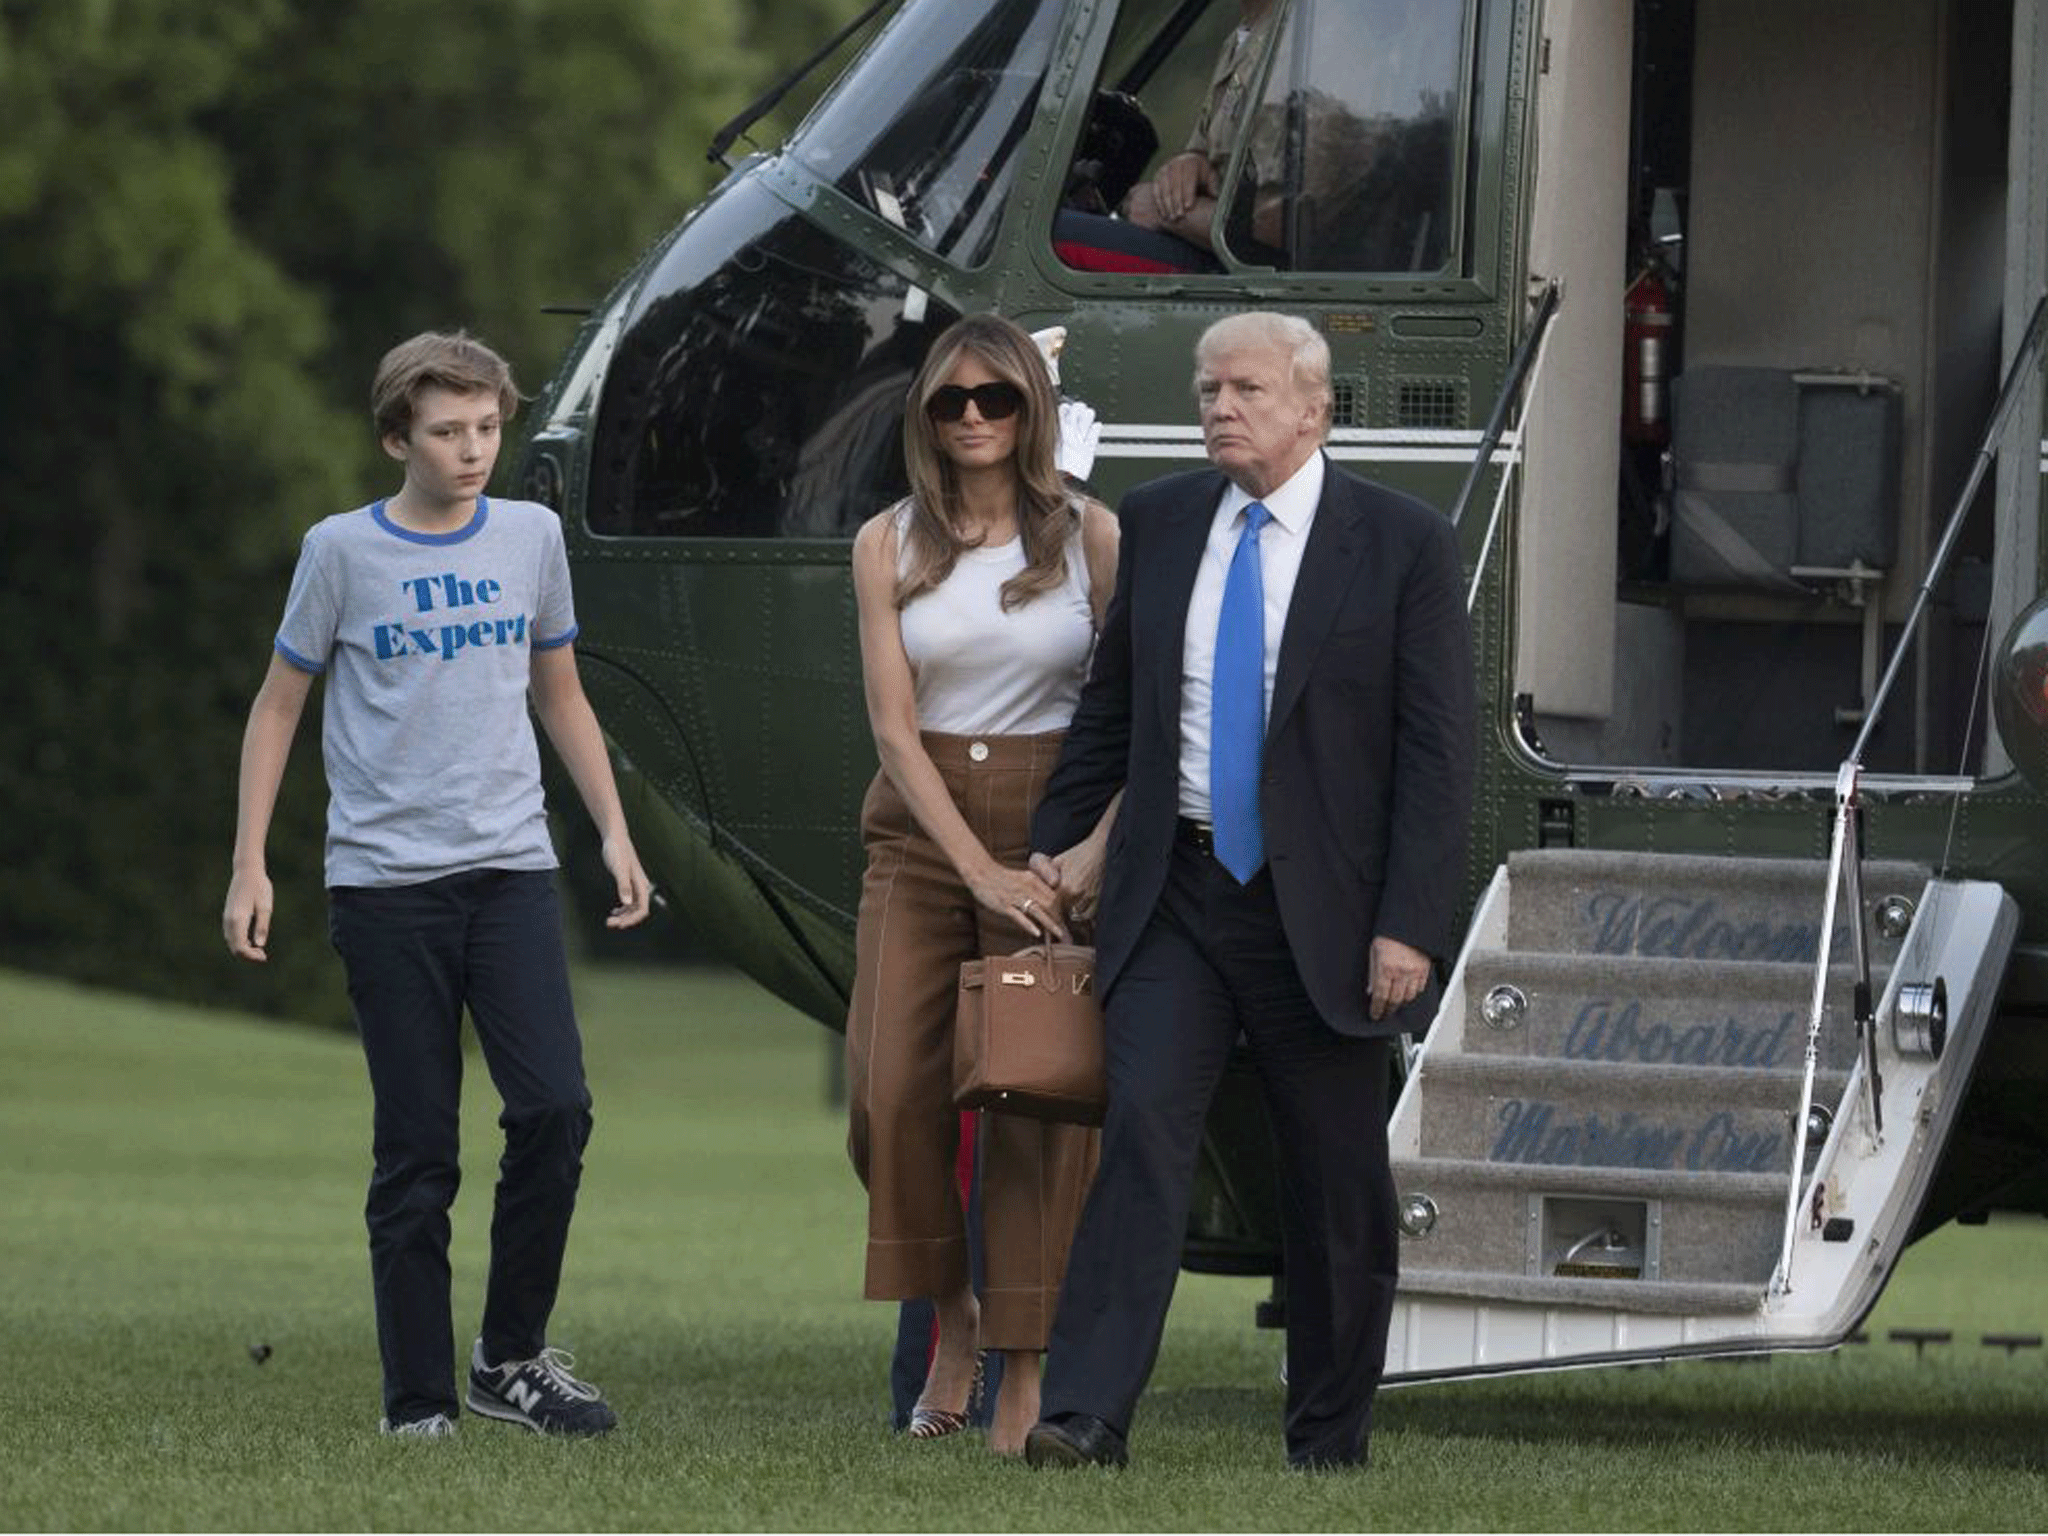 Barron and Ivanka Trump arrive at the White House with the President, five months after he took office